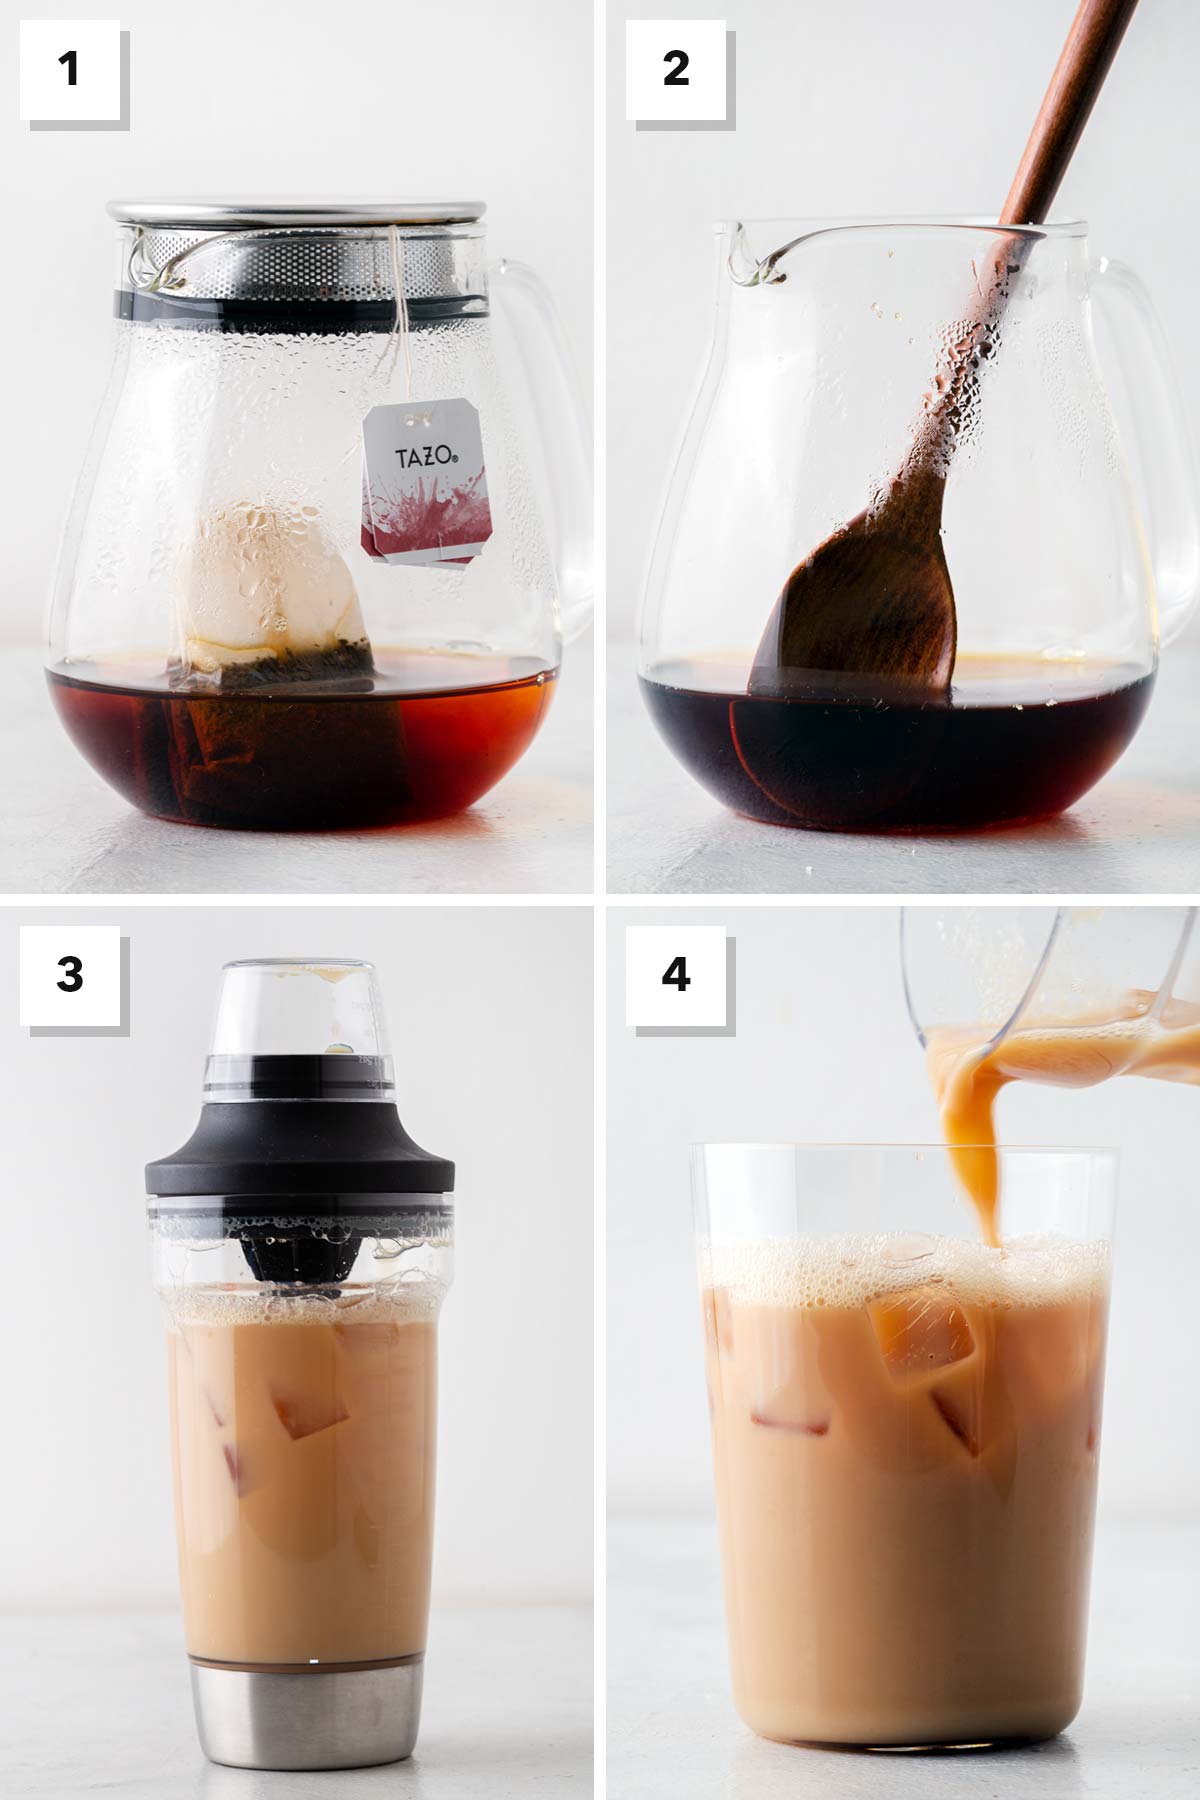 Starbucks Iced Royal English Breakfast Tea Latte Copycat recipe step-by-step instructions in 4 photos.